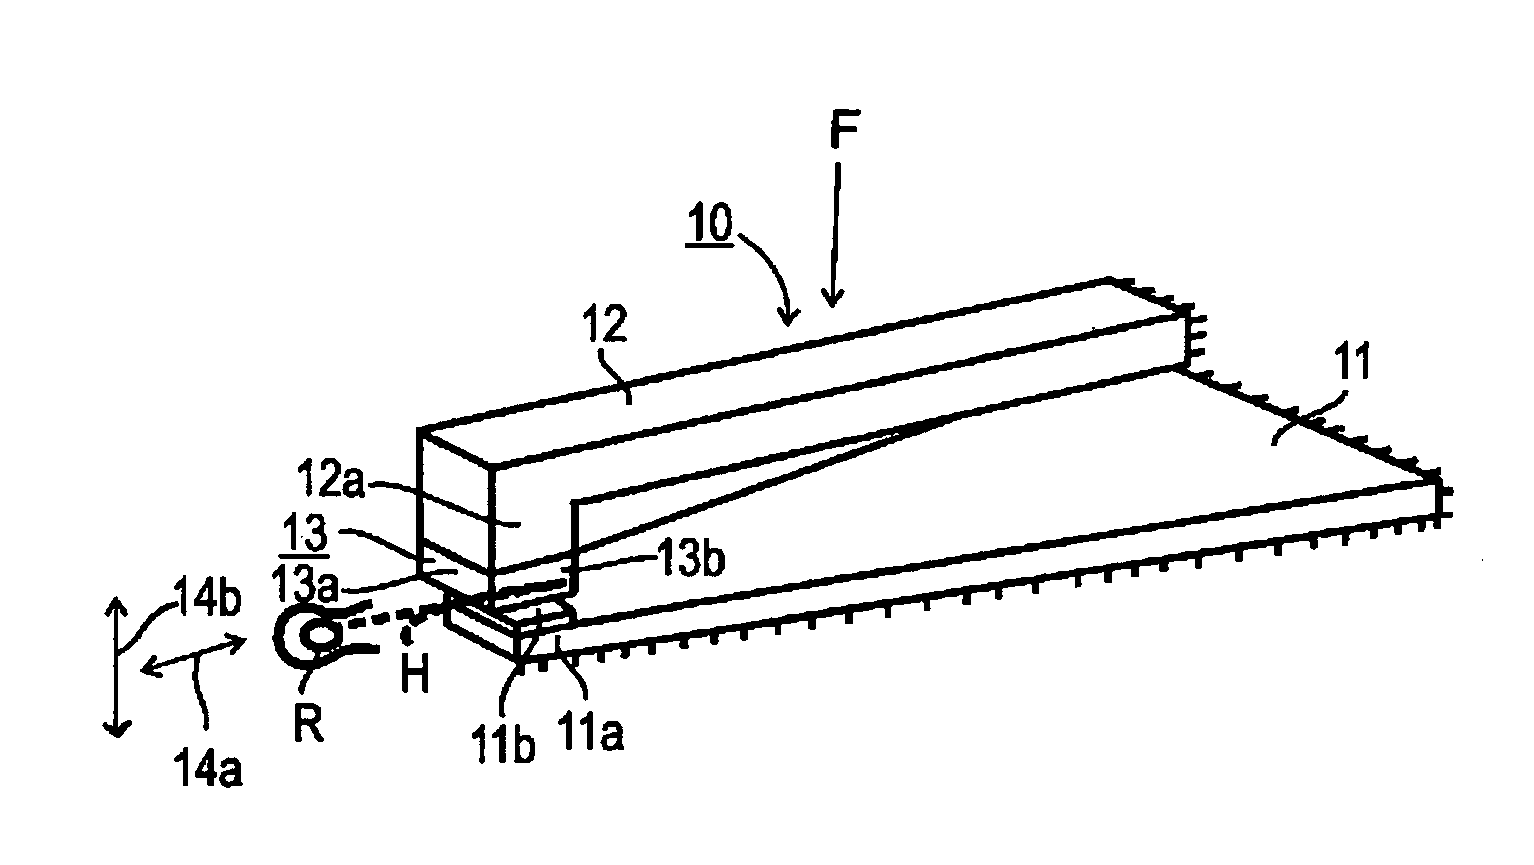 Device for applying high-frequency vibrations to hair for removing same